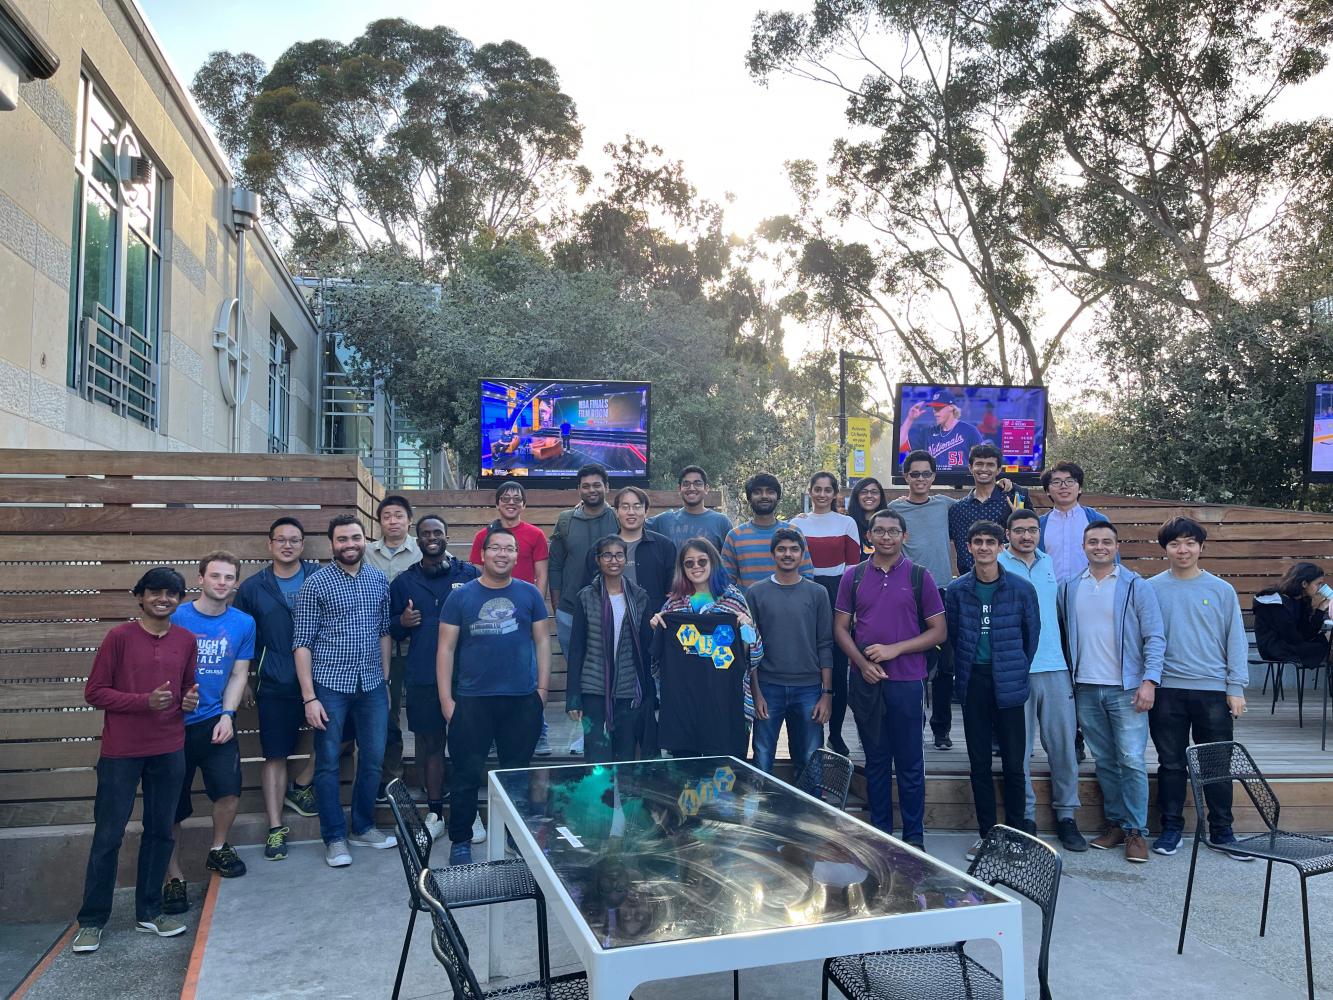 A group of about 25 RoboGrads members pose for a group photo at the end of the year social.